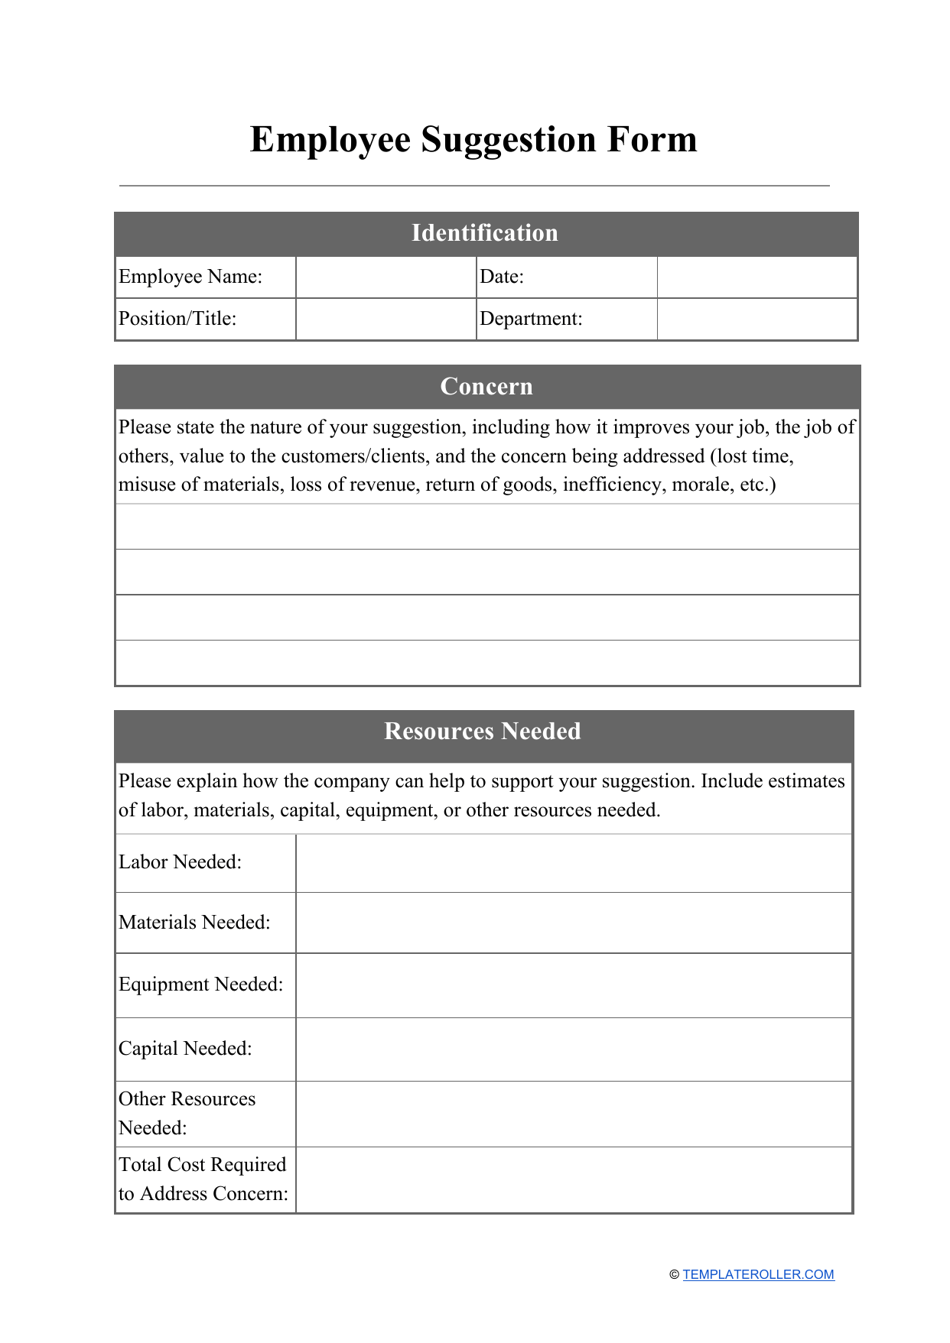 Employee Suggestion Form Download Printable Pdf Templateroller